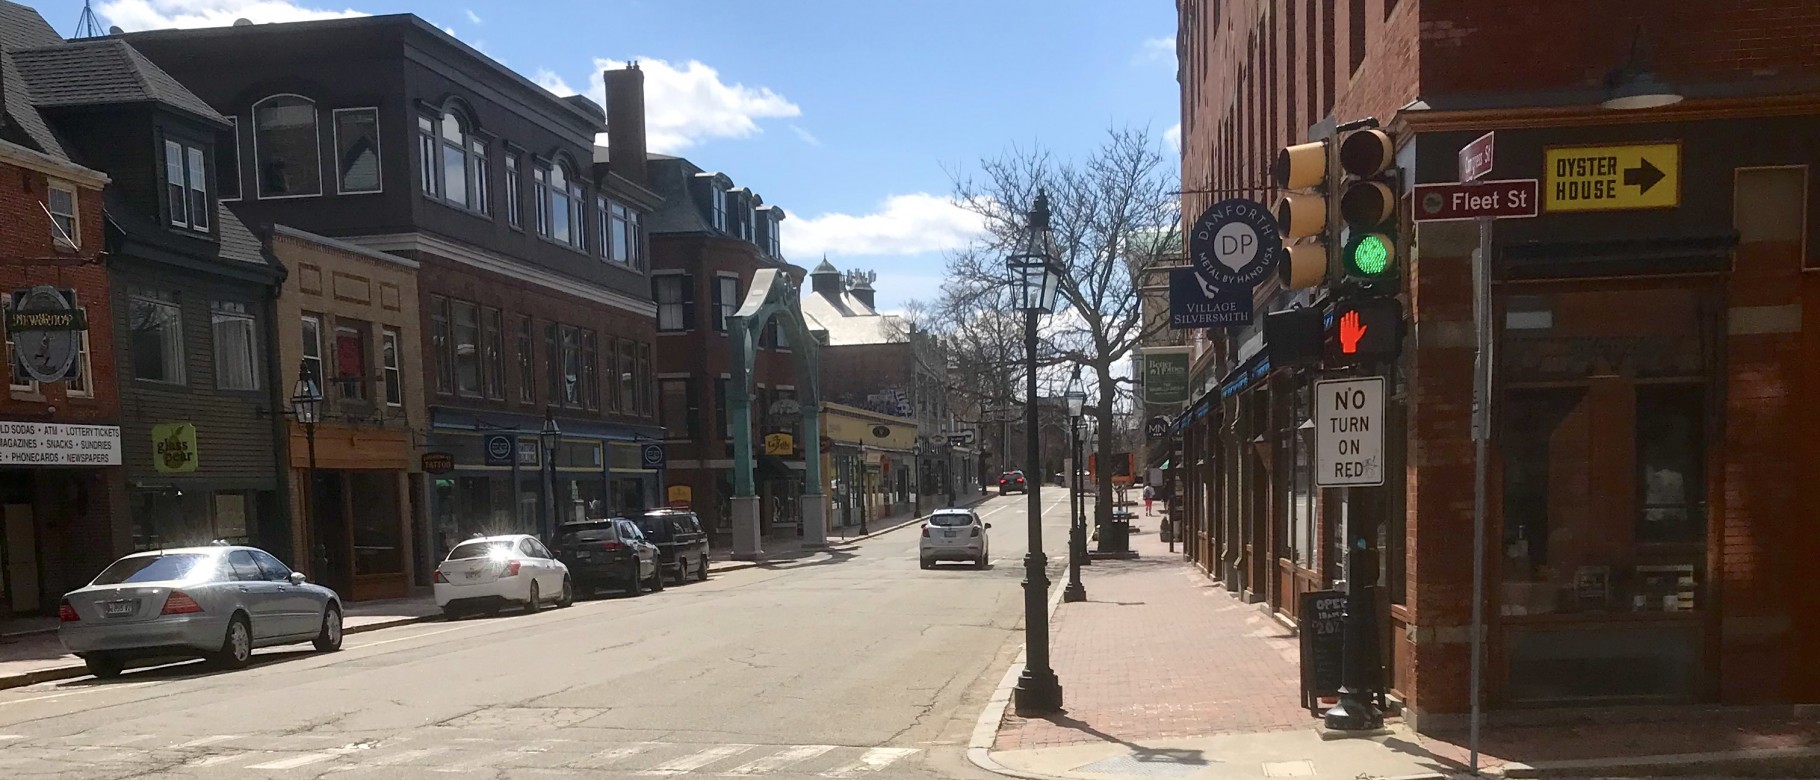 An empty street illustrates the effects that COVID-19 has had on local businesses and communities across the United States.